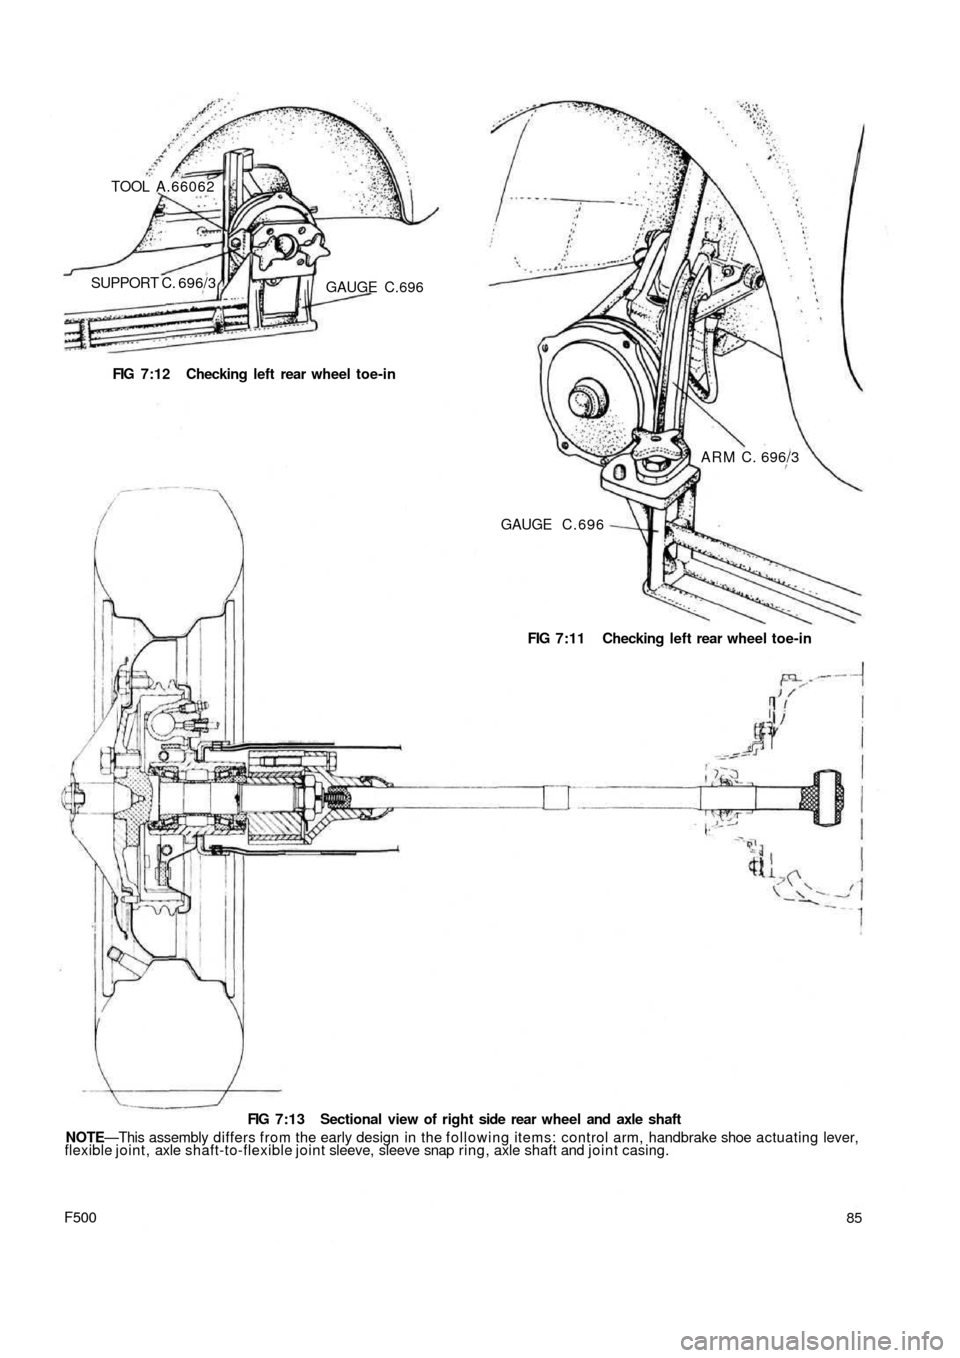 FIAT 500 1957 1.G Workshop Manual TOOL A.66062
SUPPORT C. 696/3GAUGE C.696
FIG 7:12 Checking left rear wheel toe-in
ARM C. 696/3
GAUGE C . 6 9 6
FIG 7:11 Checking left rear wheel toe-in
F500
FIG 7:13 Sectional view of right side rear 